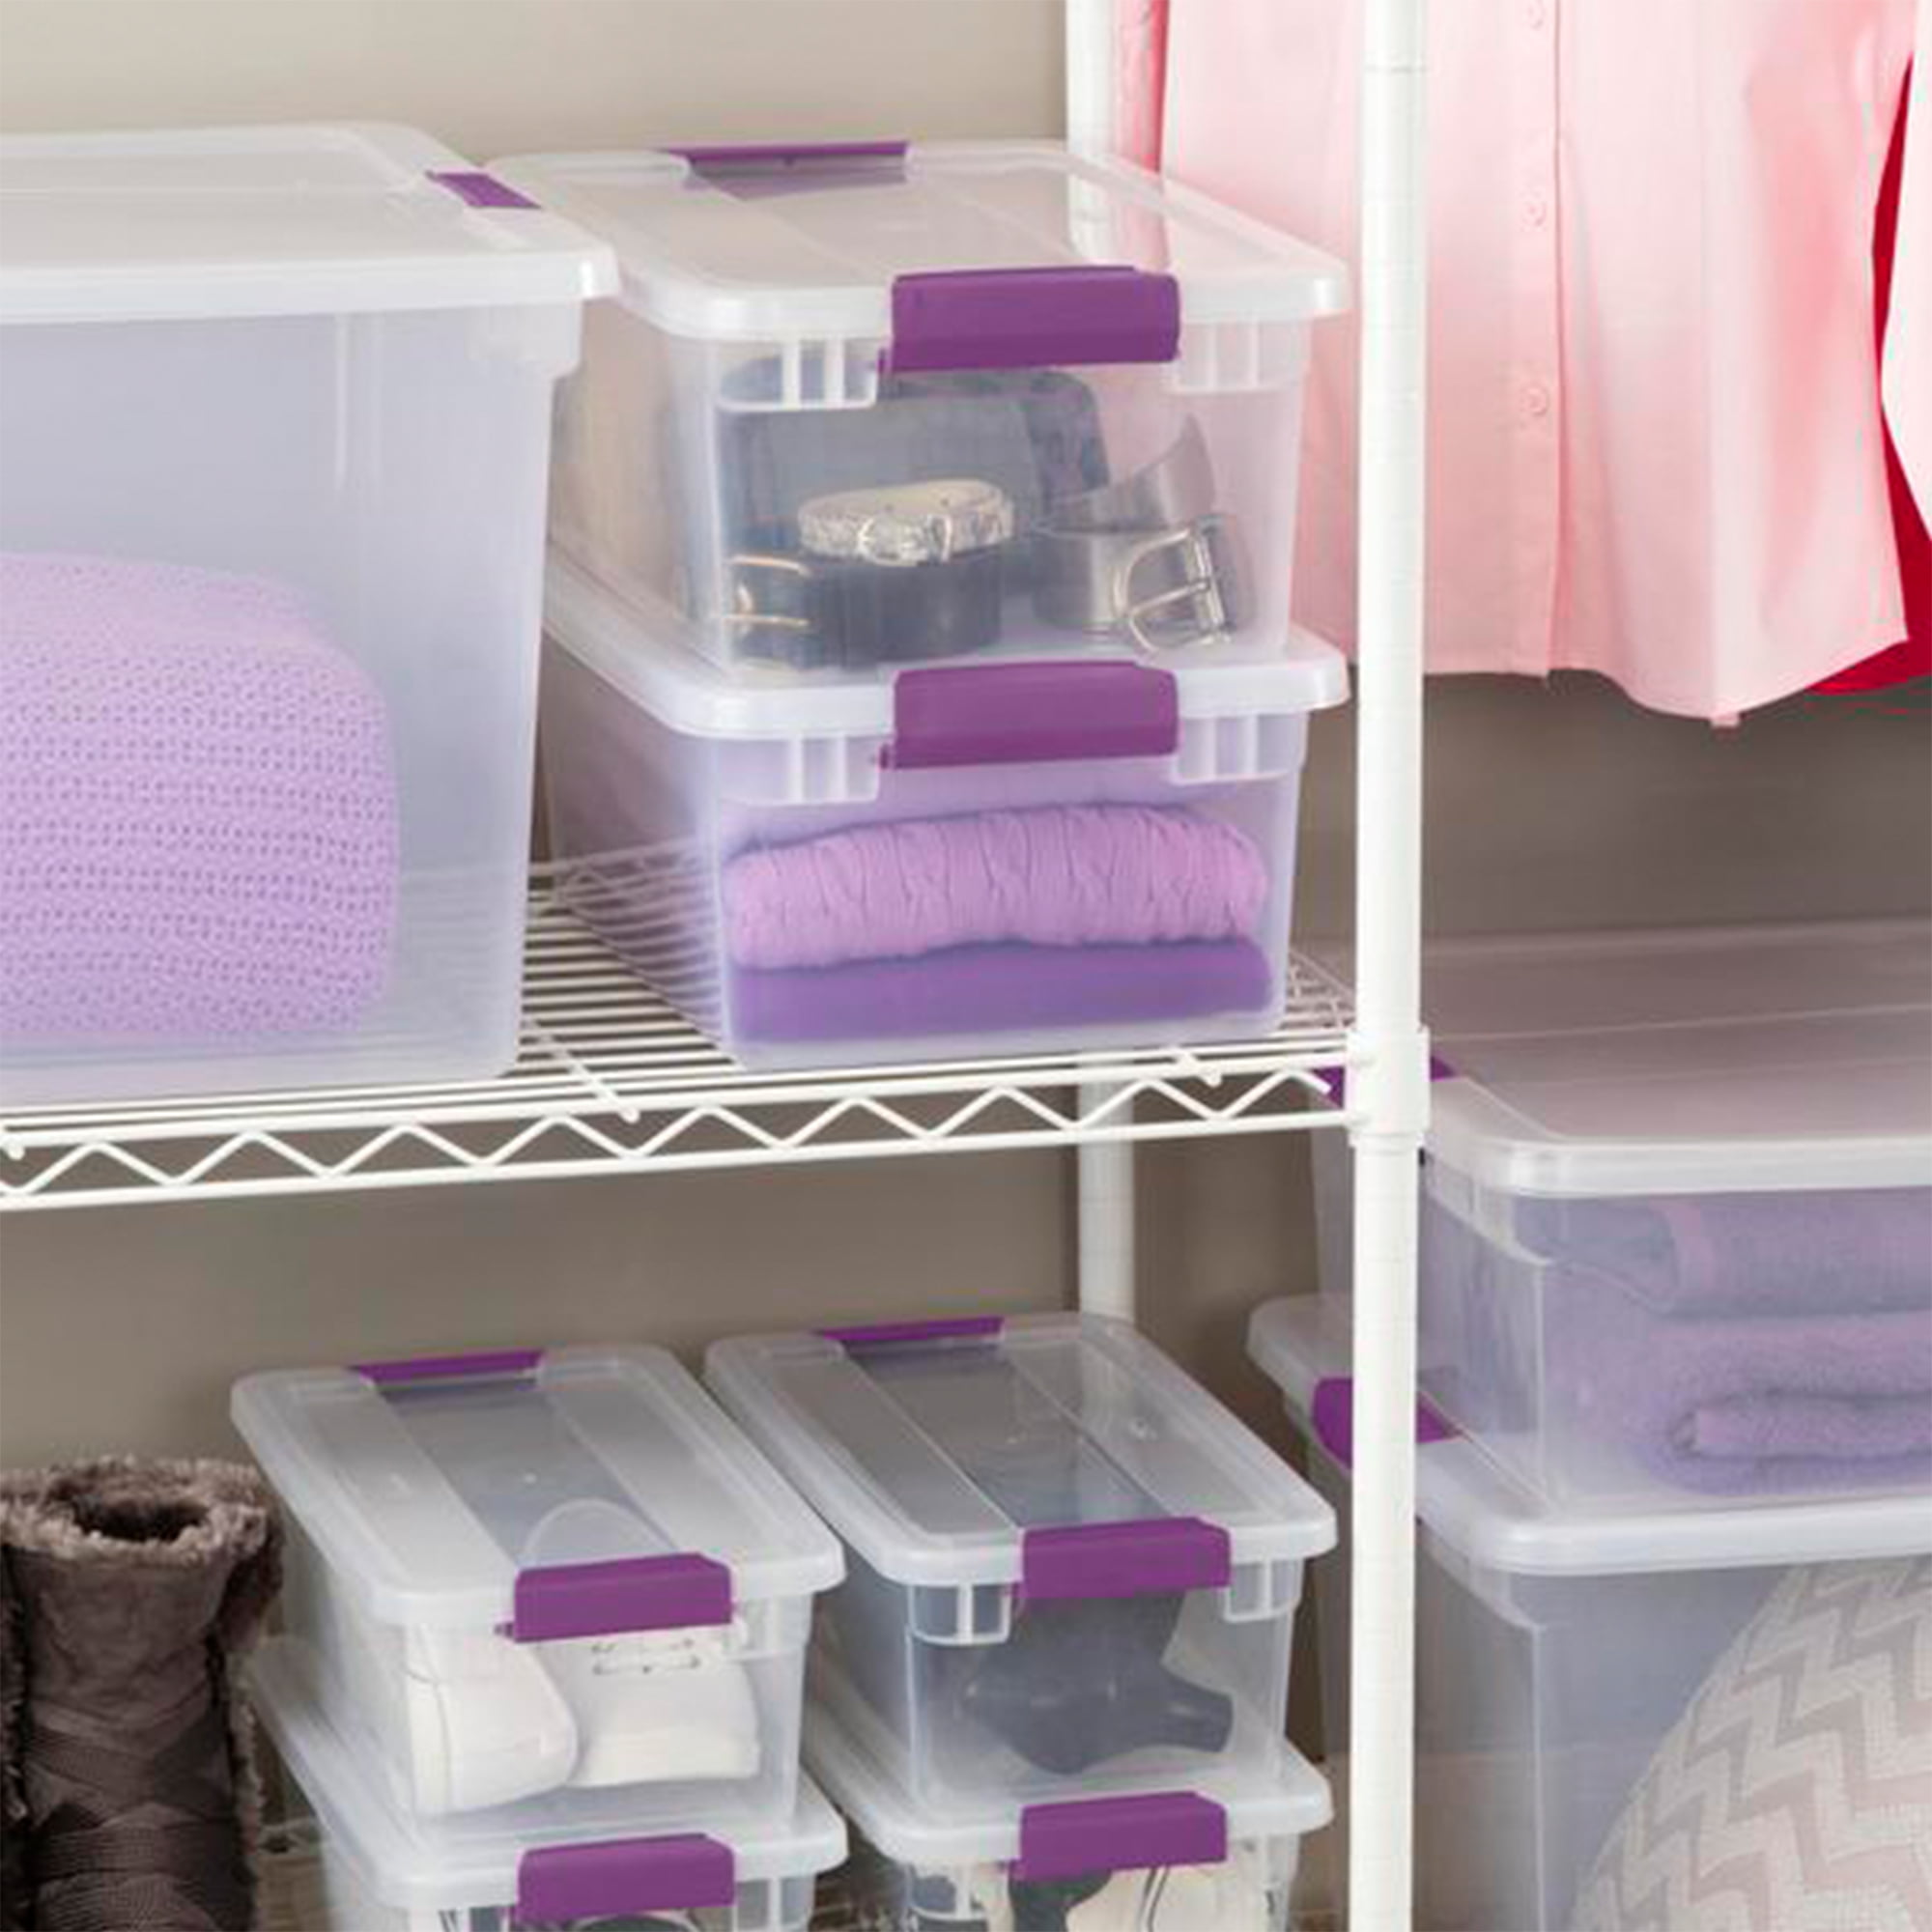 Sterilite 15 Qt Latching Storage Box, Stackable Bin with Latch Lid, Plastic  Container to Organize Clothes in Closet, Clear with Grey Lid, 36-Pack